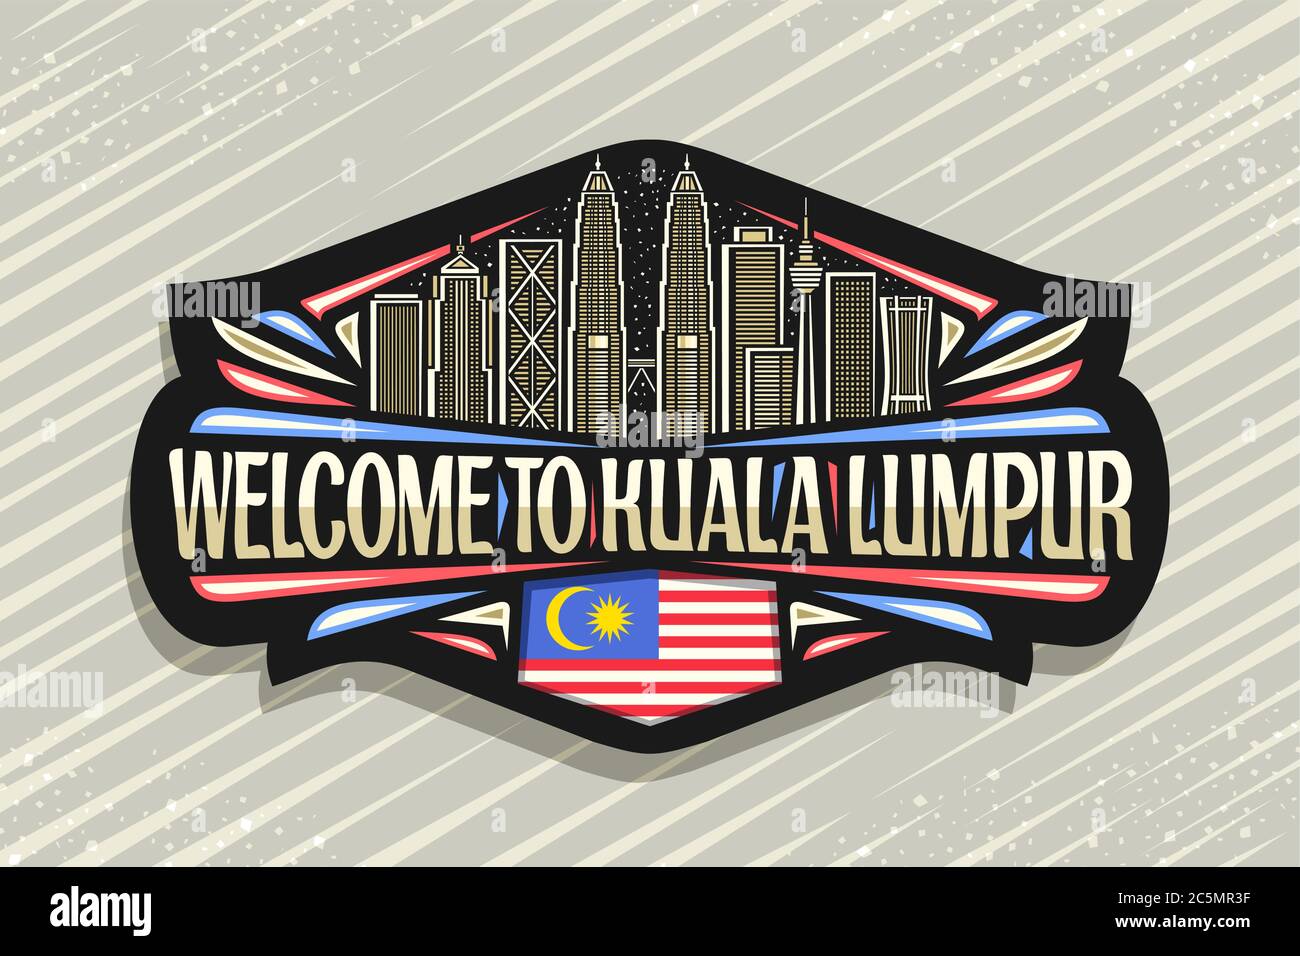 Vector logo for Kuala Lumpur, black decorative tag with line illustration of modern kuala lumpur city scape on dusk sky background, fridge magnet with Stock Vector